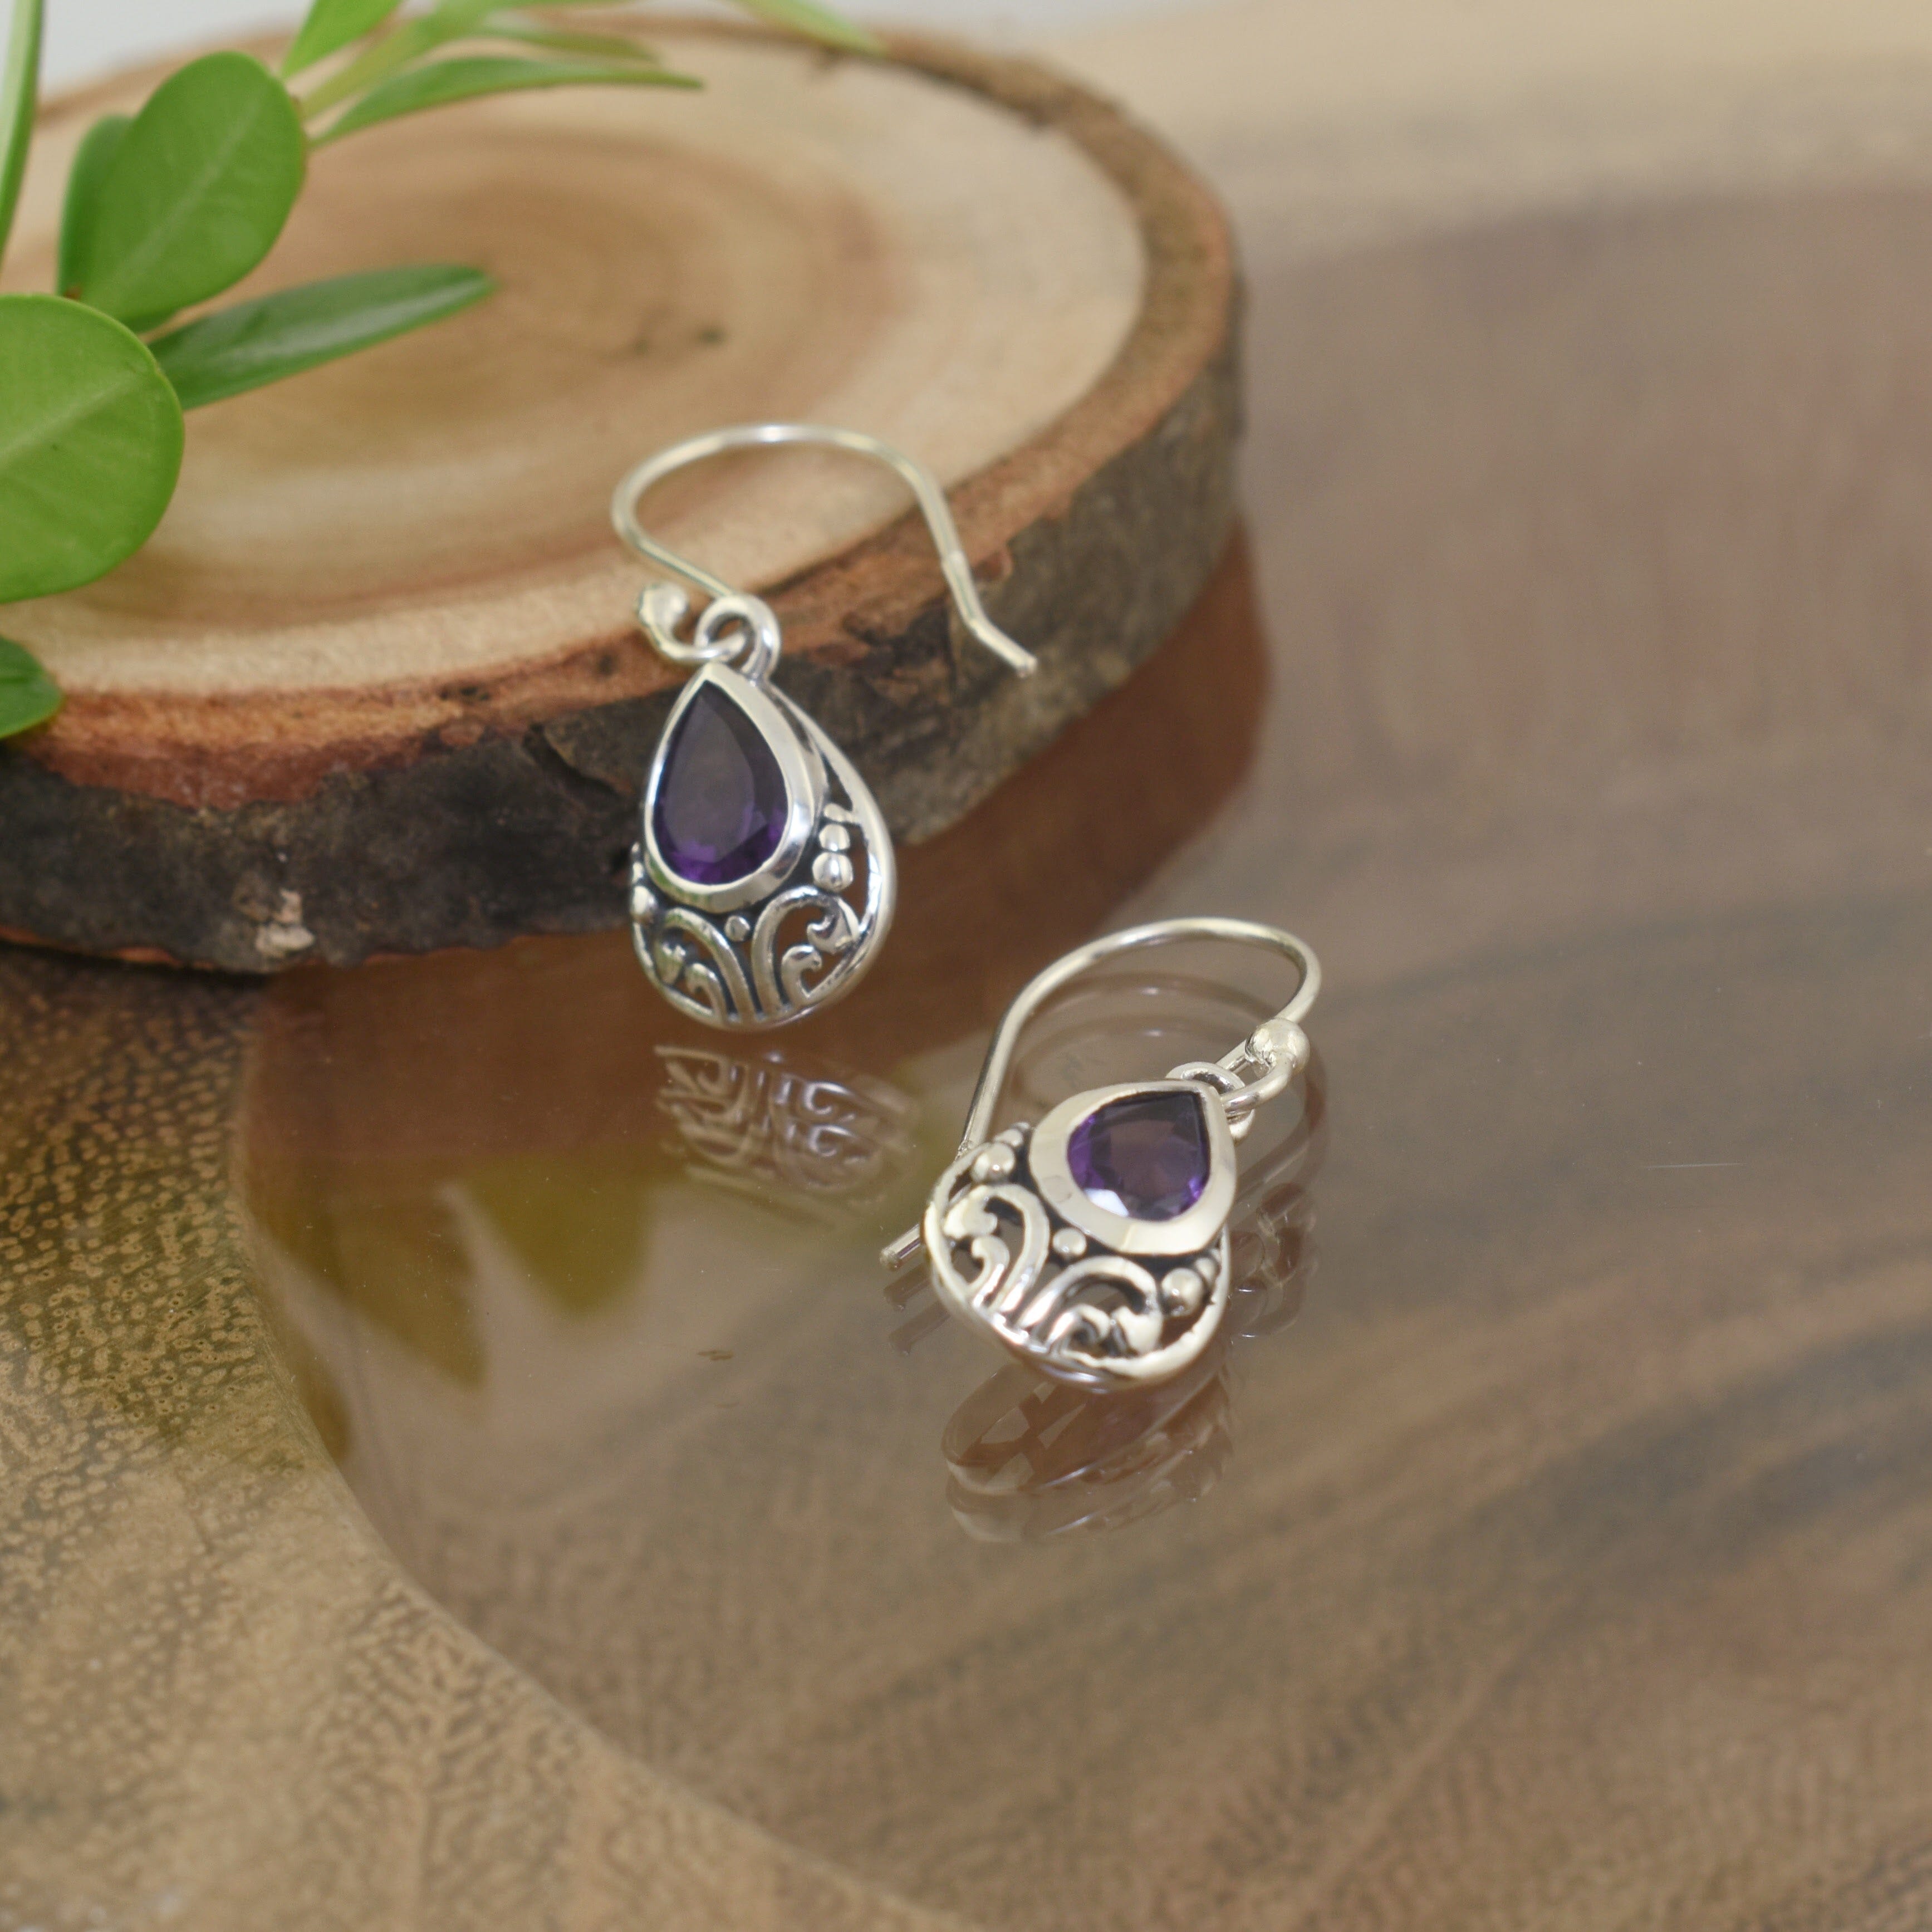 sterling silver and amethyst dangling earrings with French wire hooks